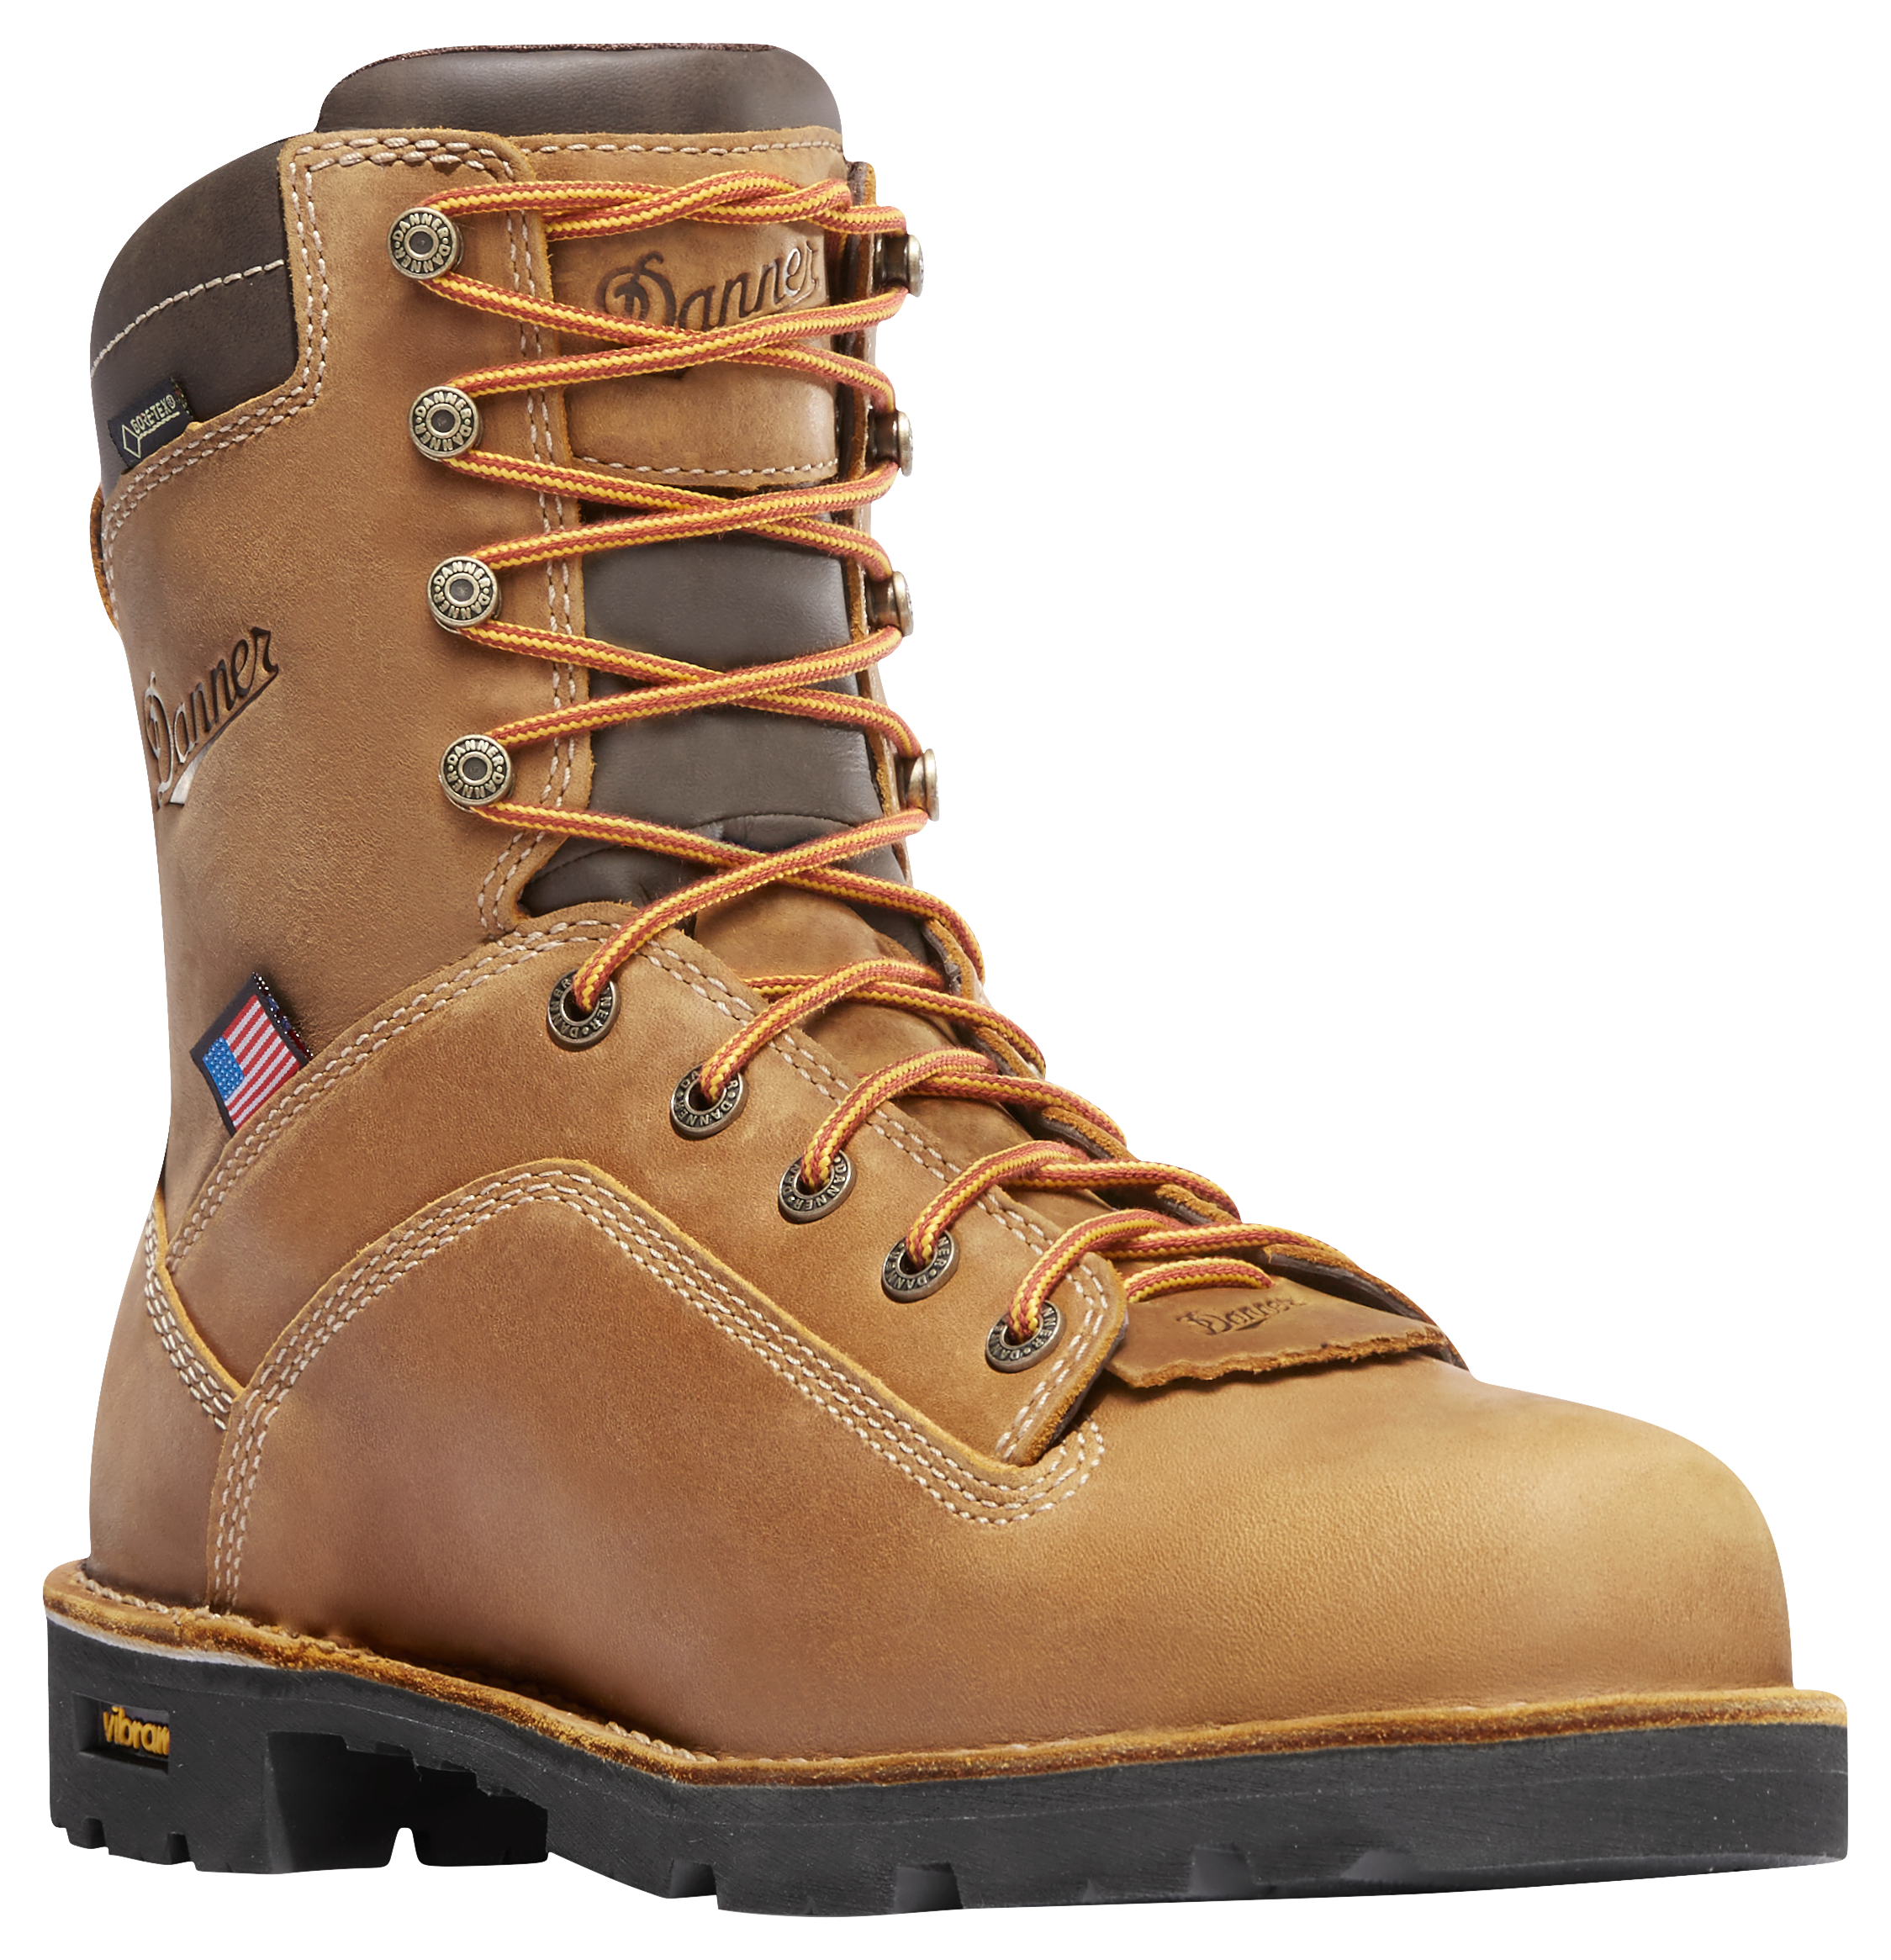 Danner Quarry USA GORE-TEX Insulated Work Boots for Men - Distress Brown - 13W